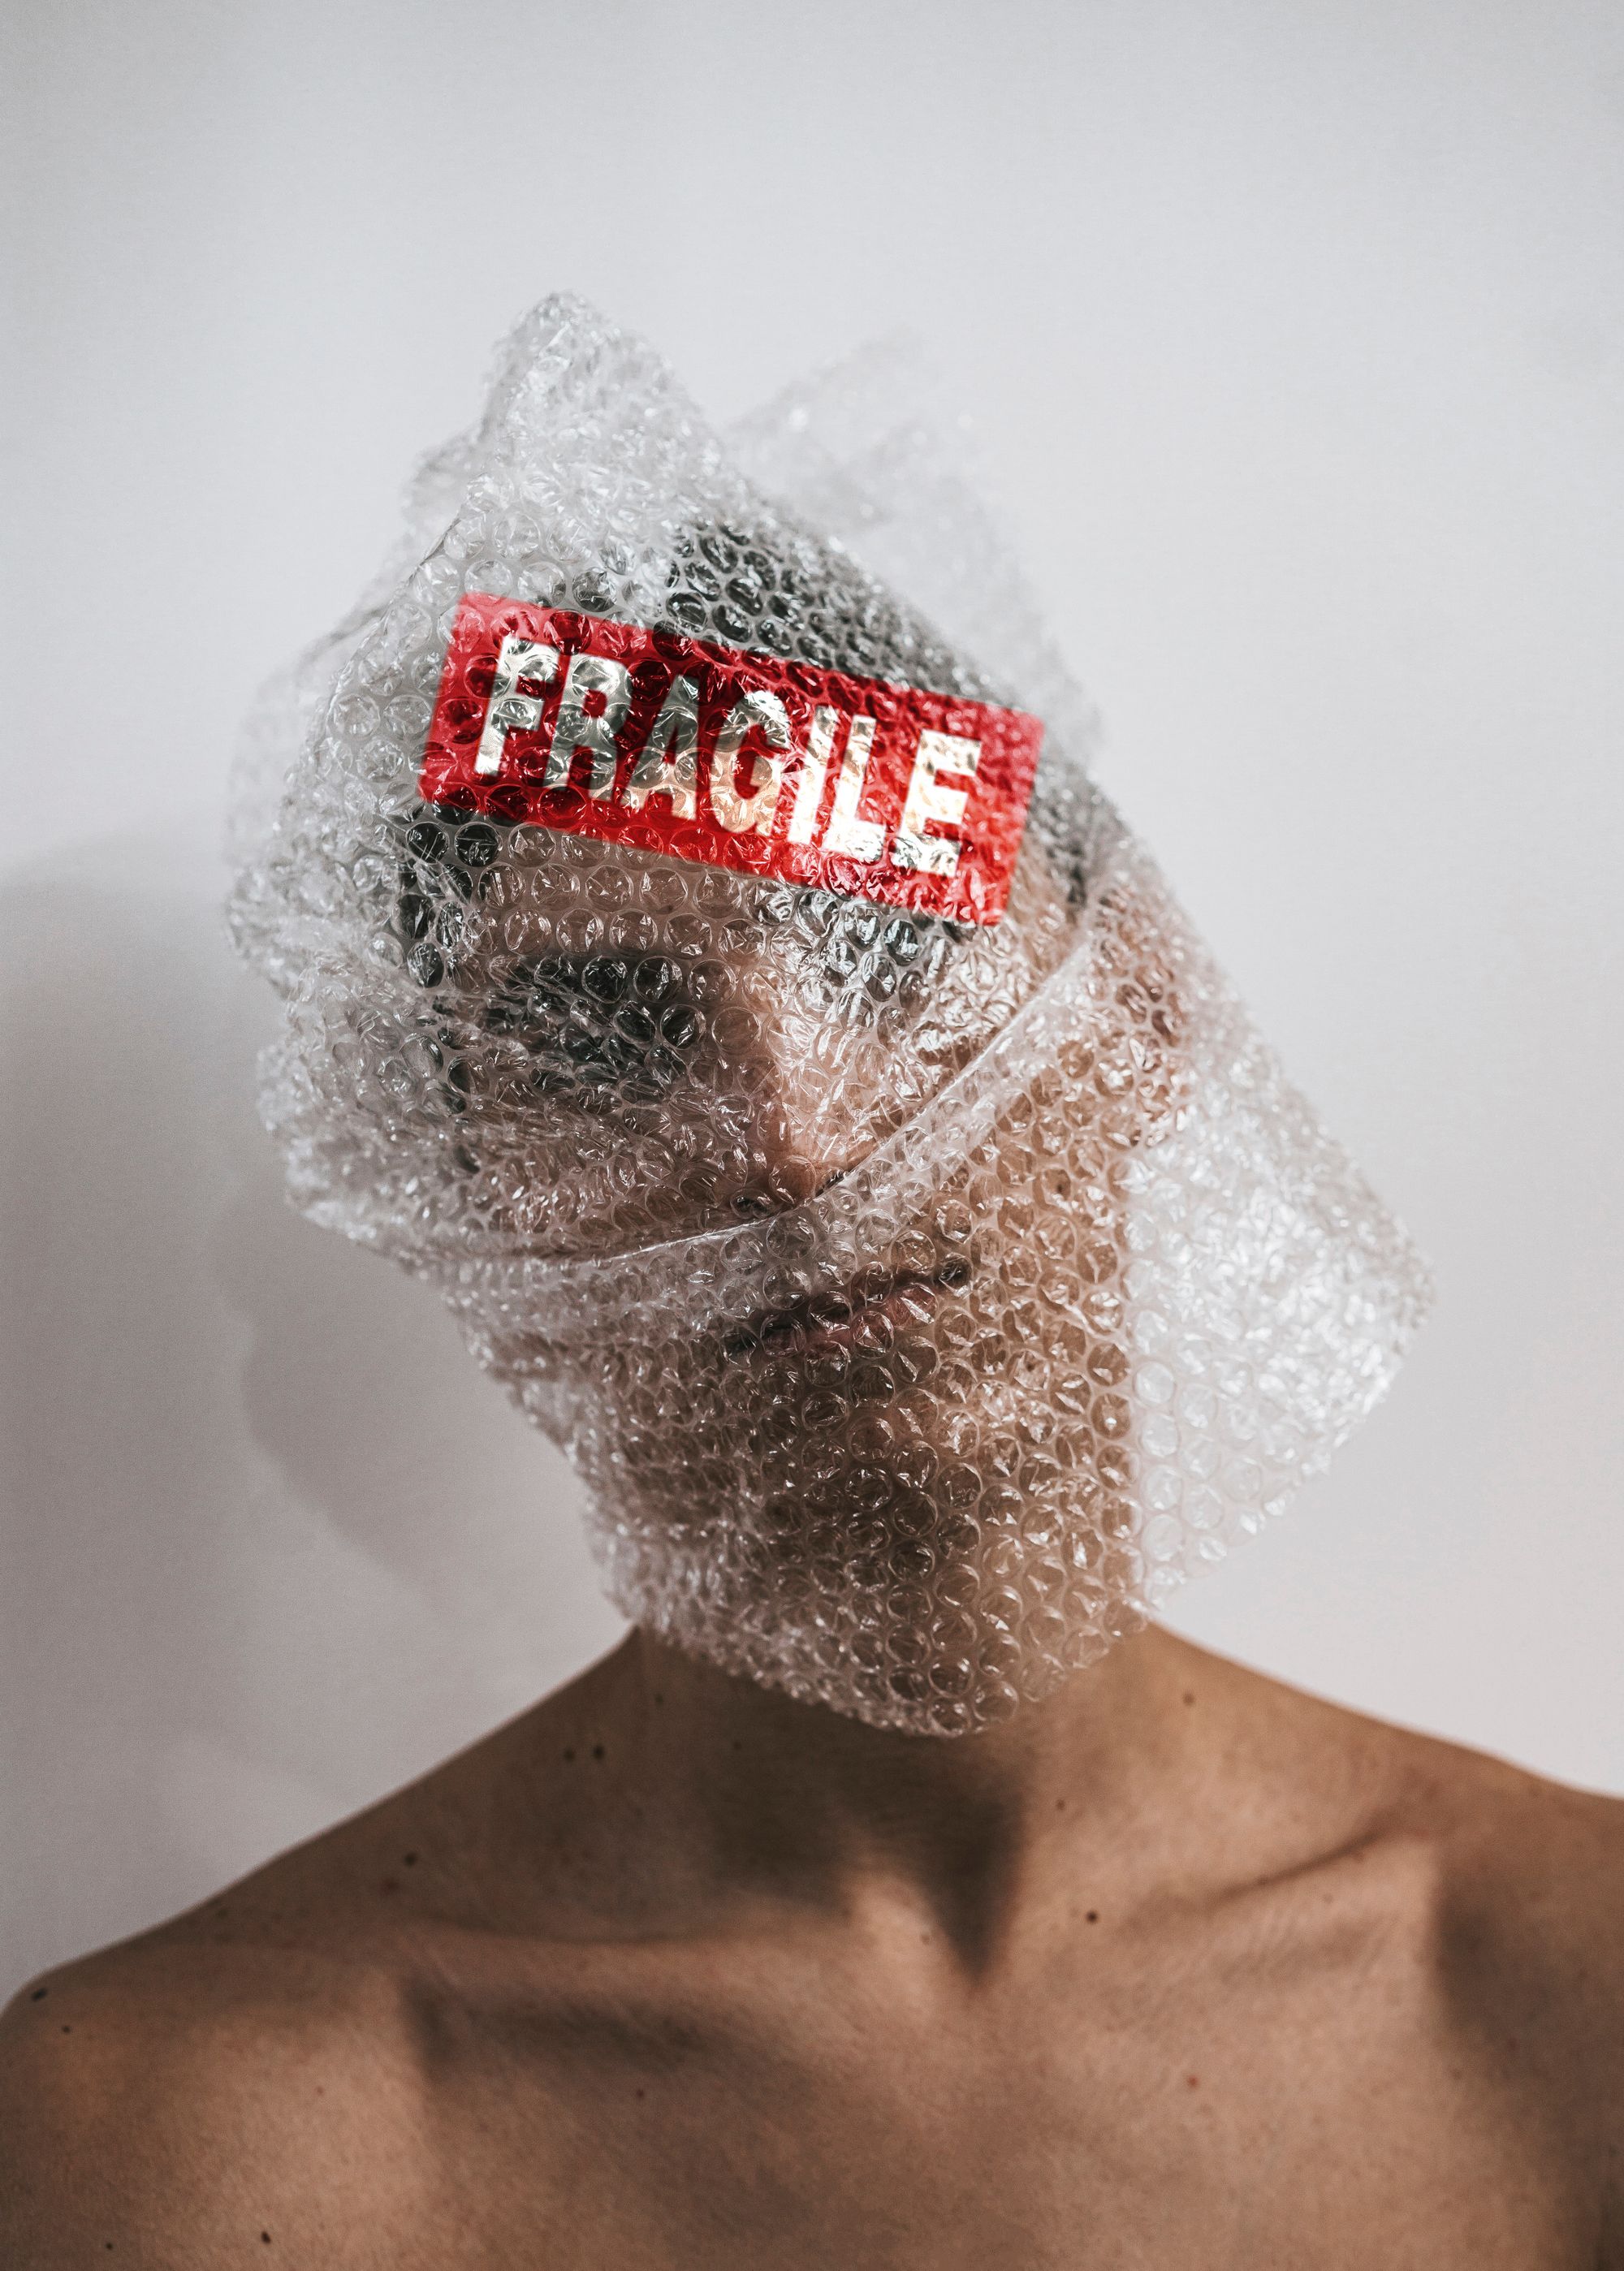 A person with bubble wrap around their head and a red sticker with the word fragile in white text